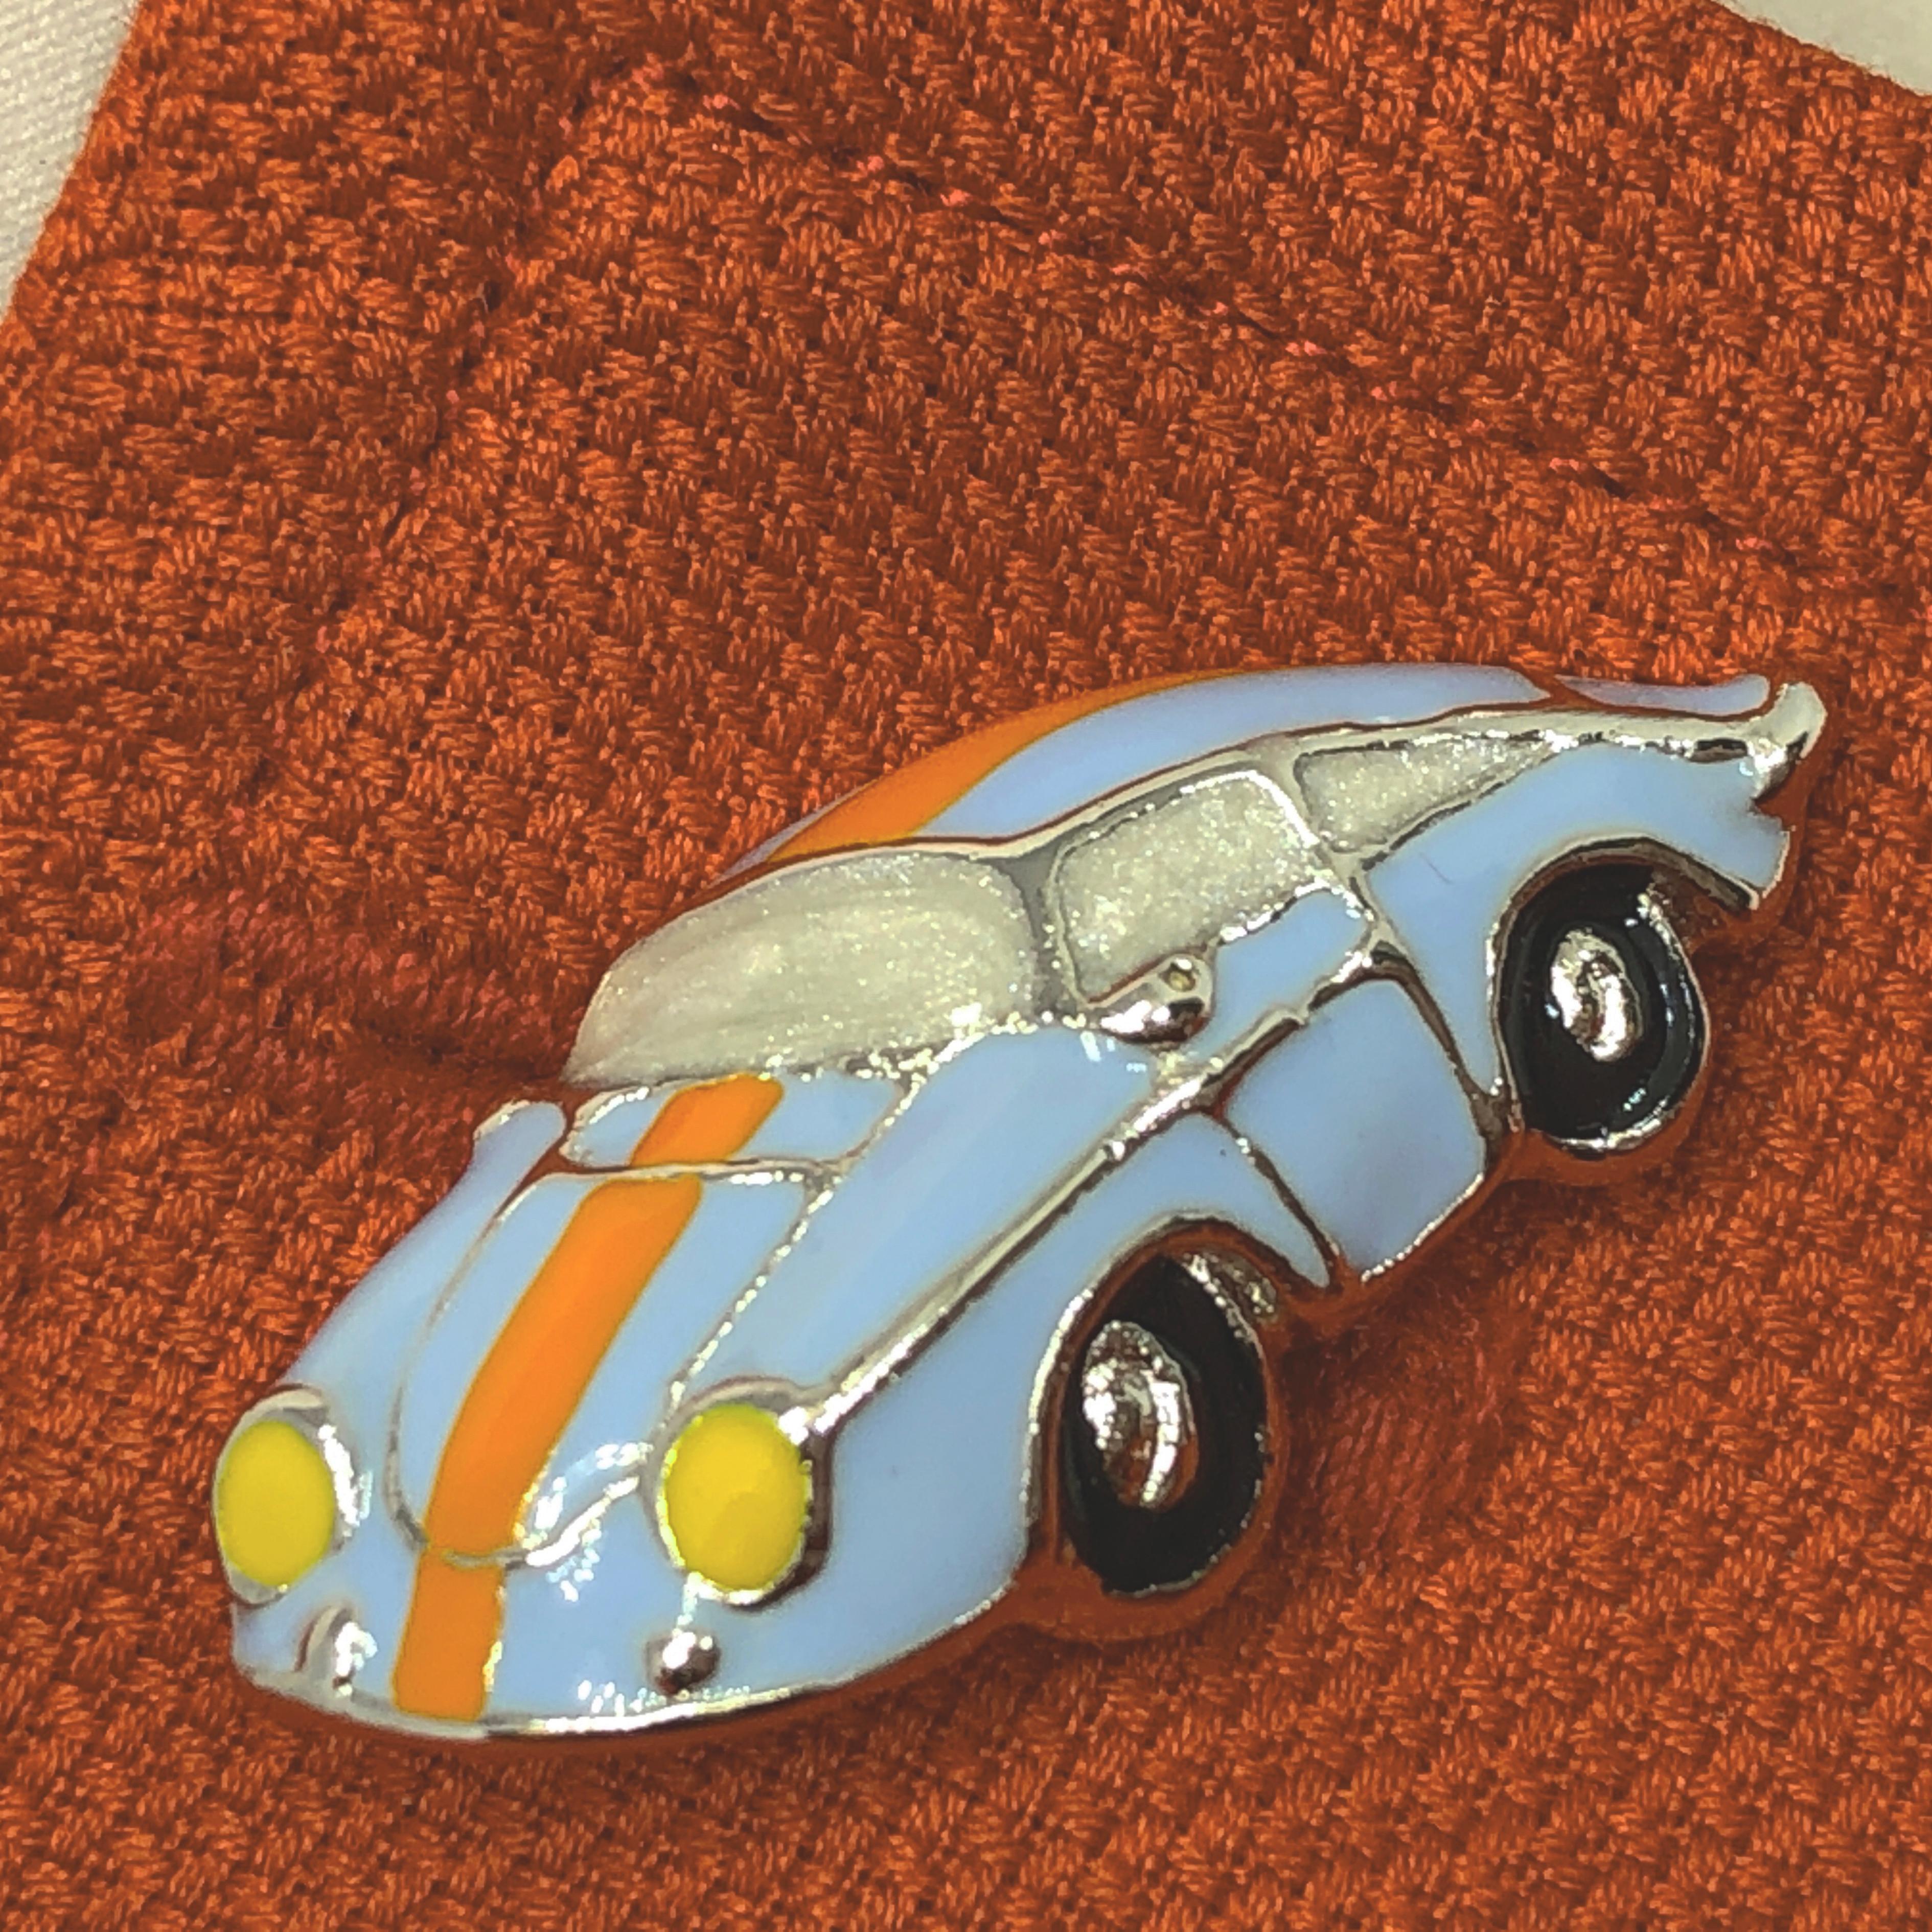 Berca Enameled Le Man’s Racing Color 911Porsche Shaped Sterling Silver Cufflinks 1